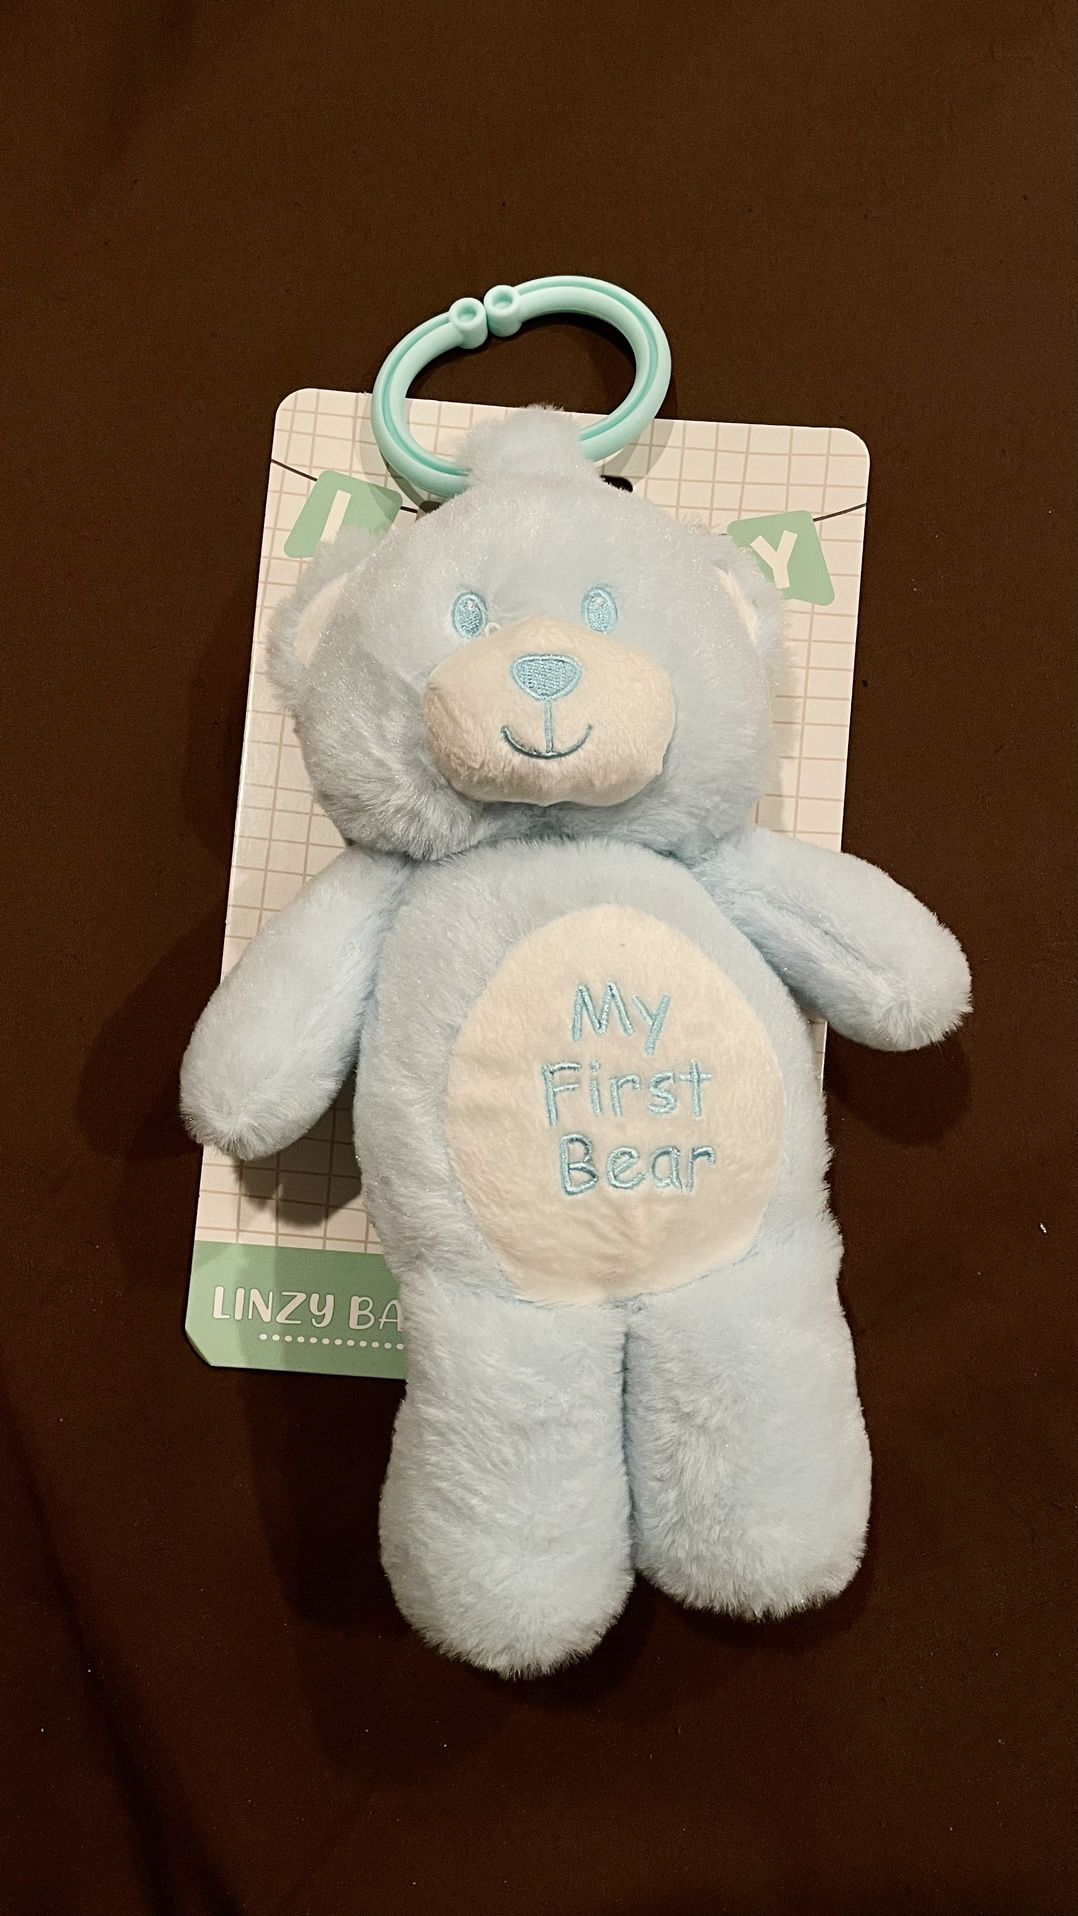 Medium-Sized Blue and White Soft Plush Toy with Hanging Hook 6 inches